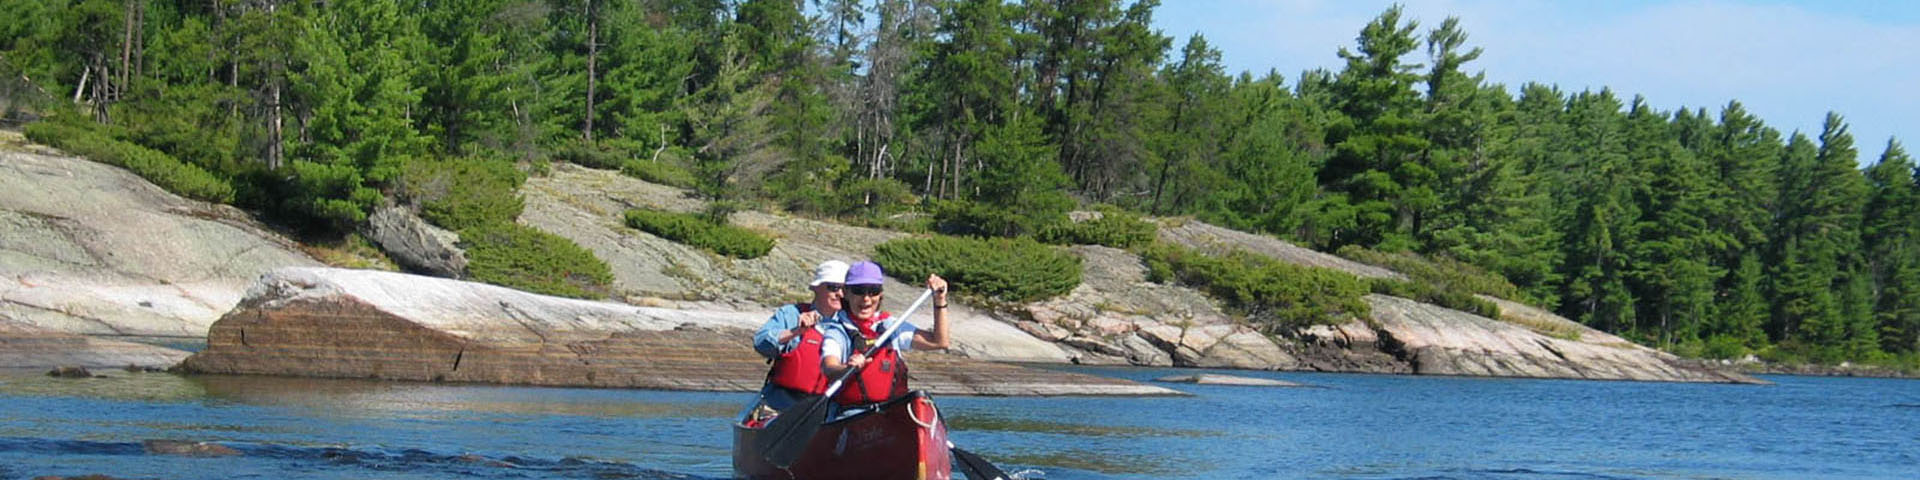 French River Canoe Trip by Black Feather - Image 156